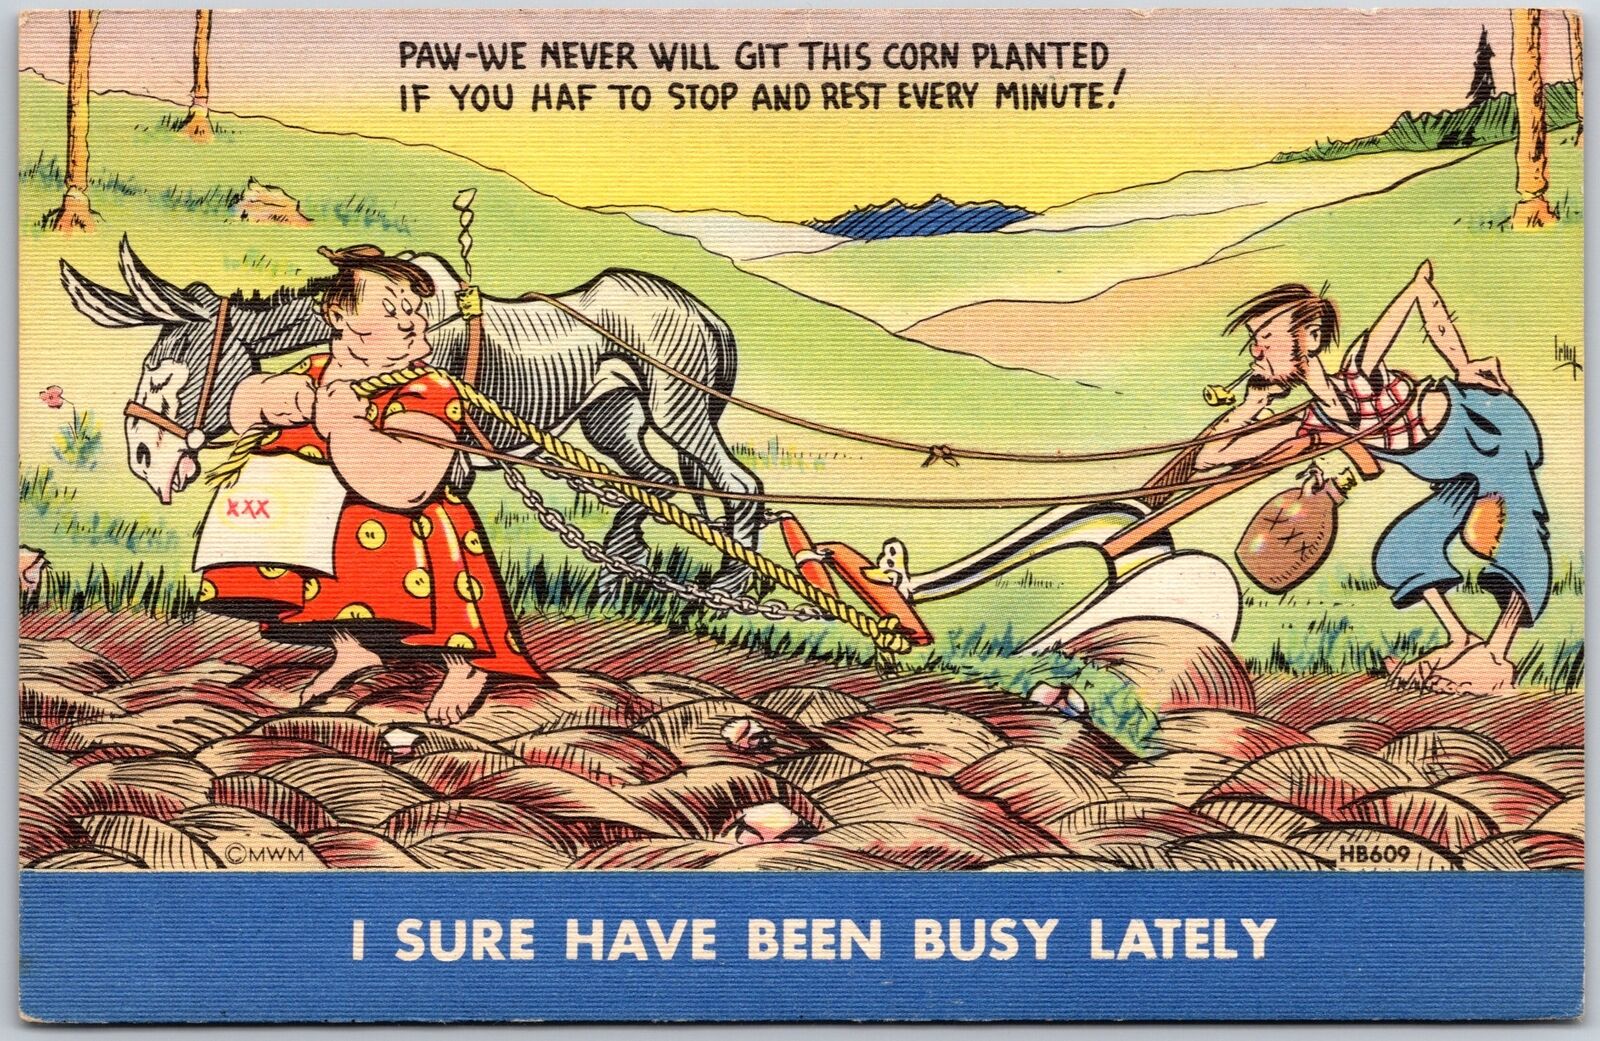 Lazy Man Plowinf Tge Field Got Pulled By Woman And Horse Comic Card Postcard